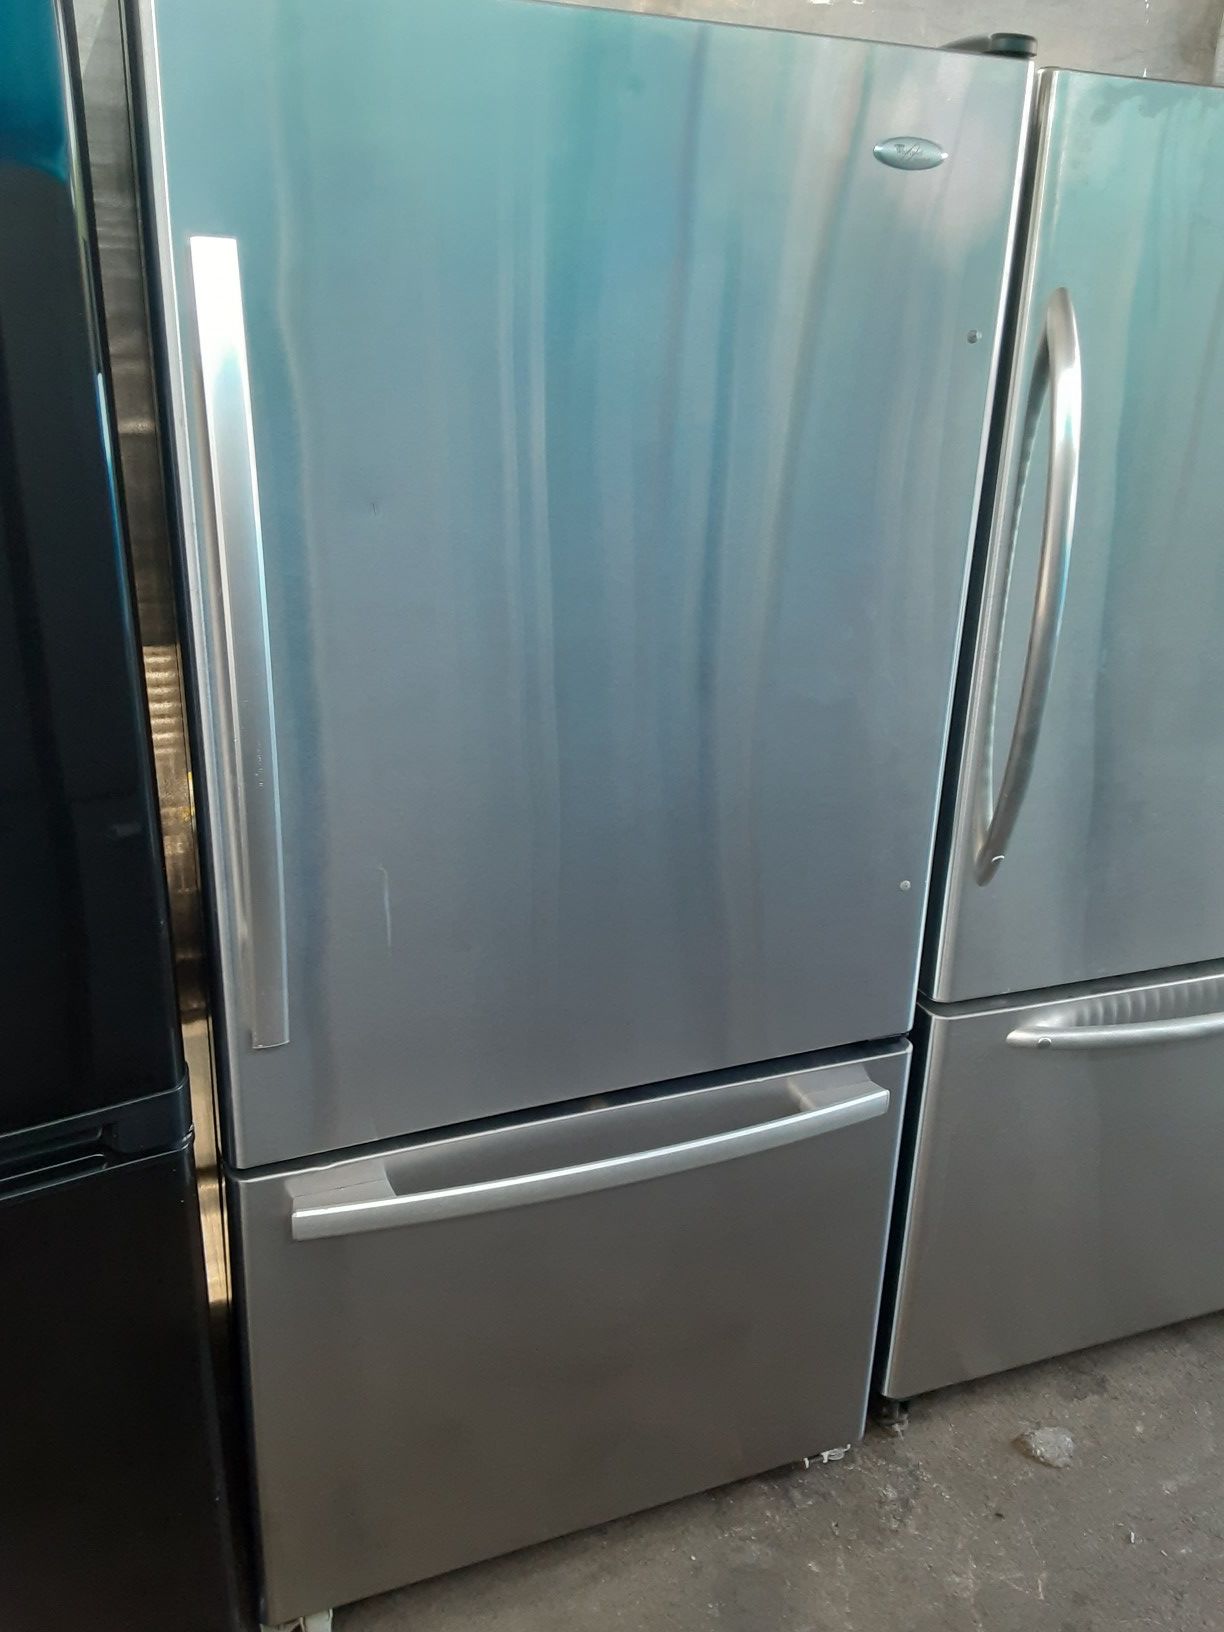 $399 Whirlpool Amana stainless bottom freezer fridge 33 in wide includes delivery in the San Fernando Valley of warranty and installation